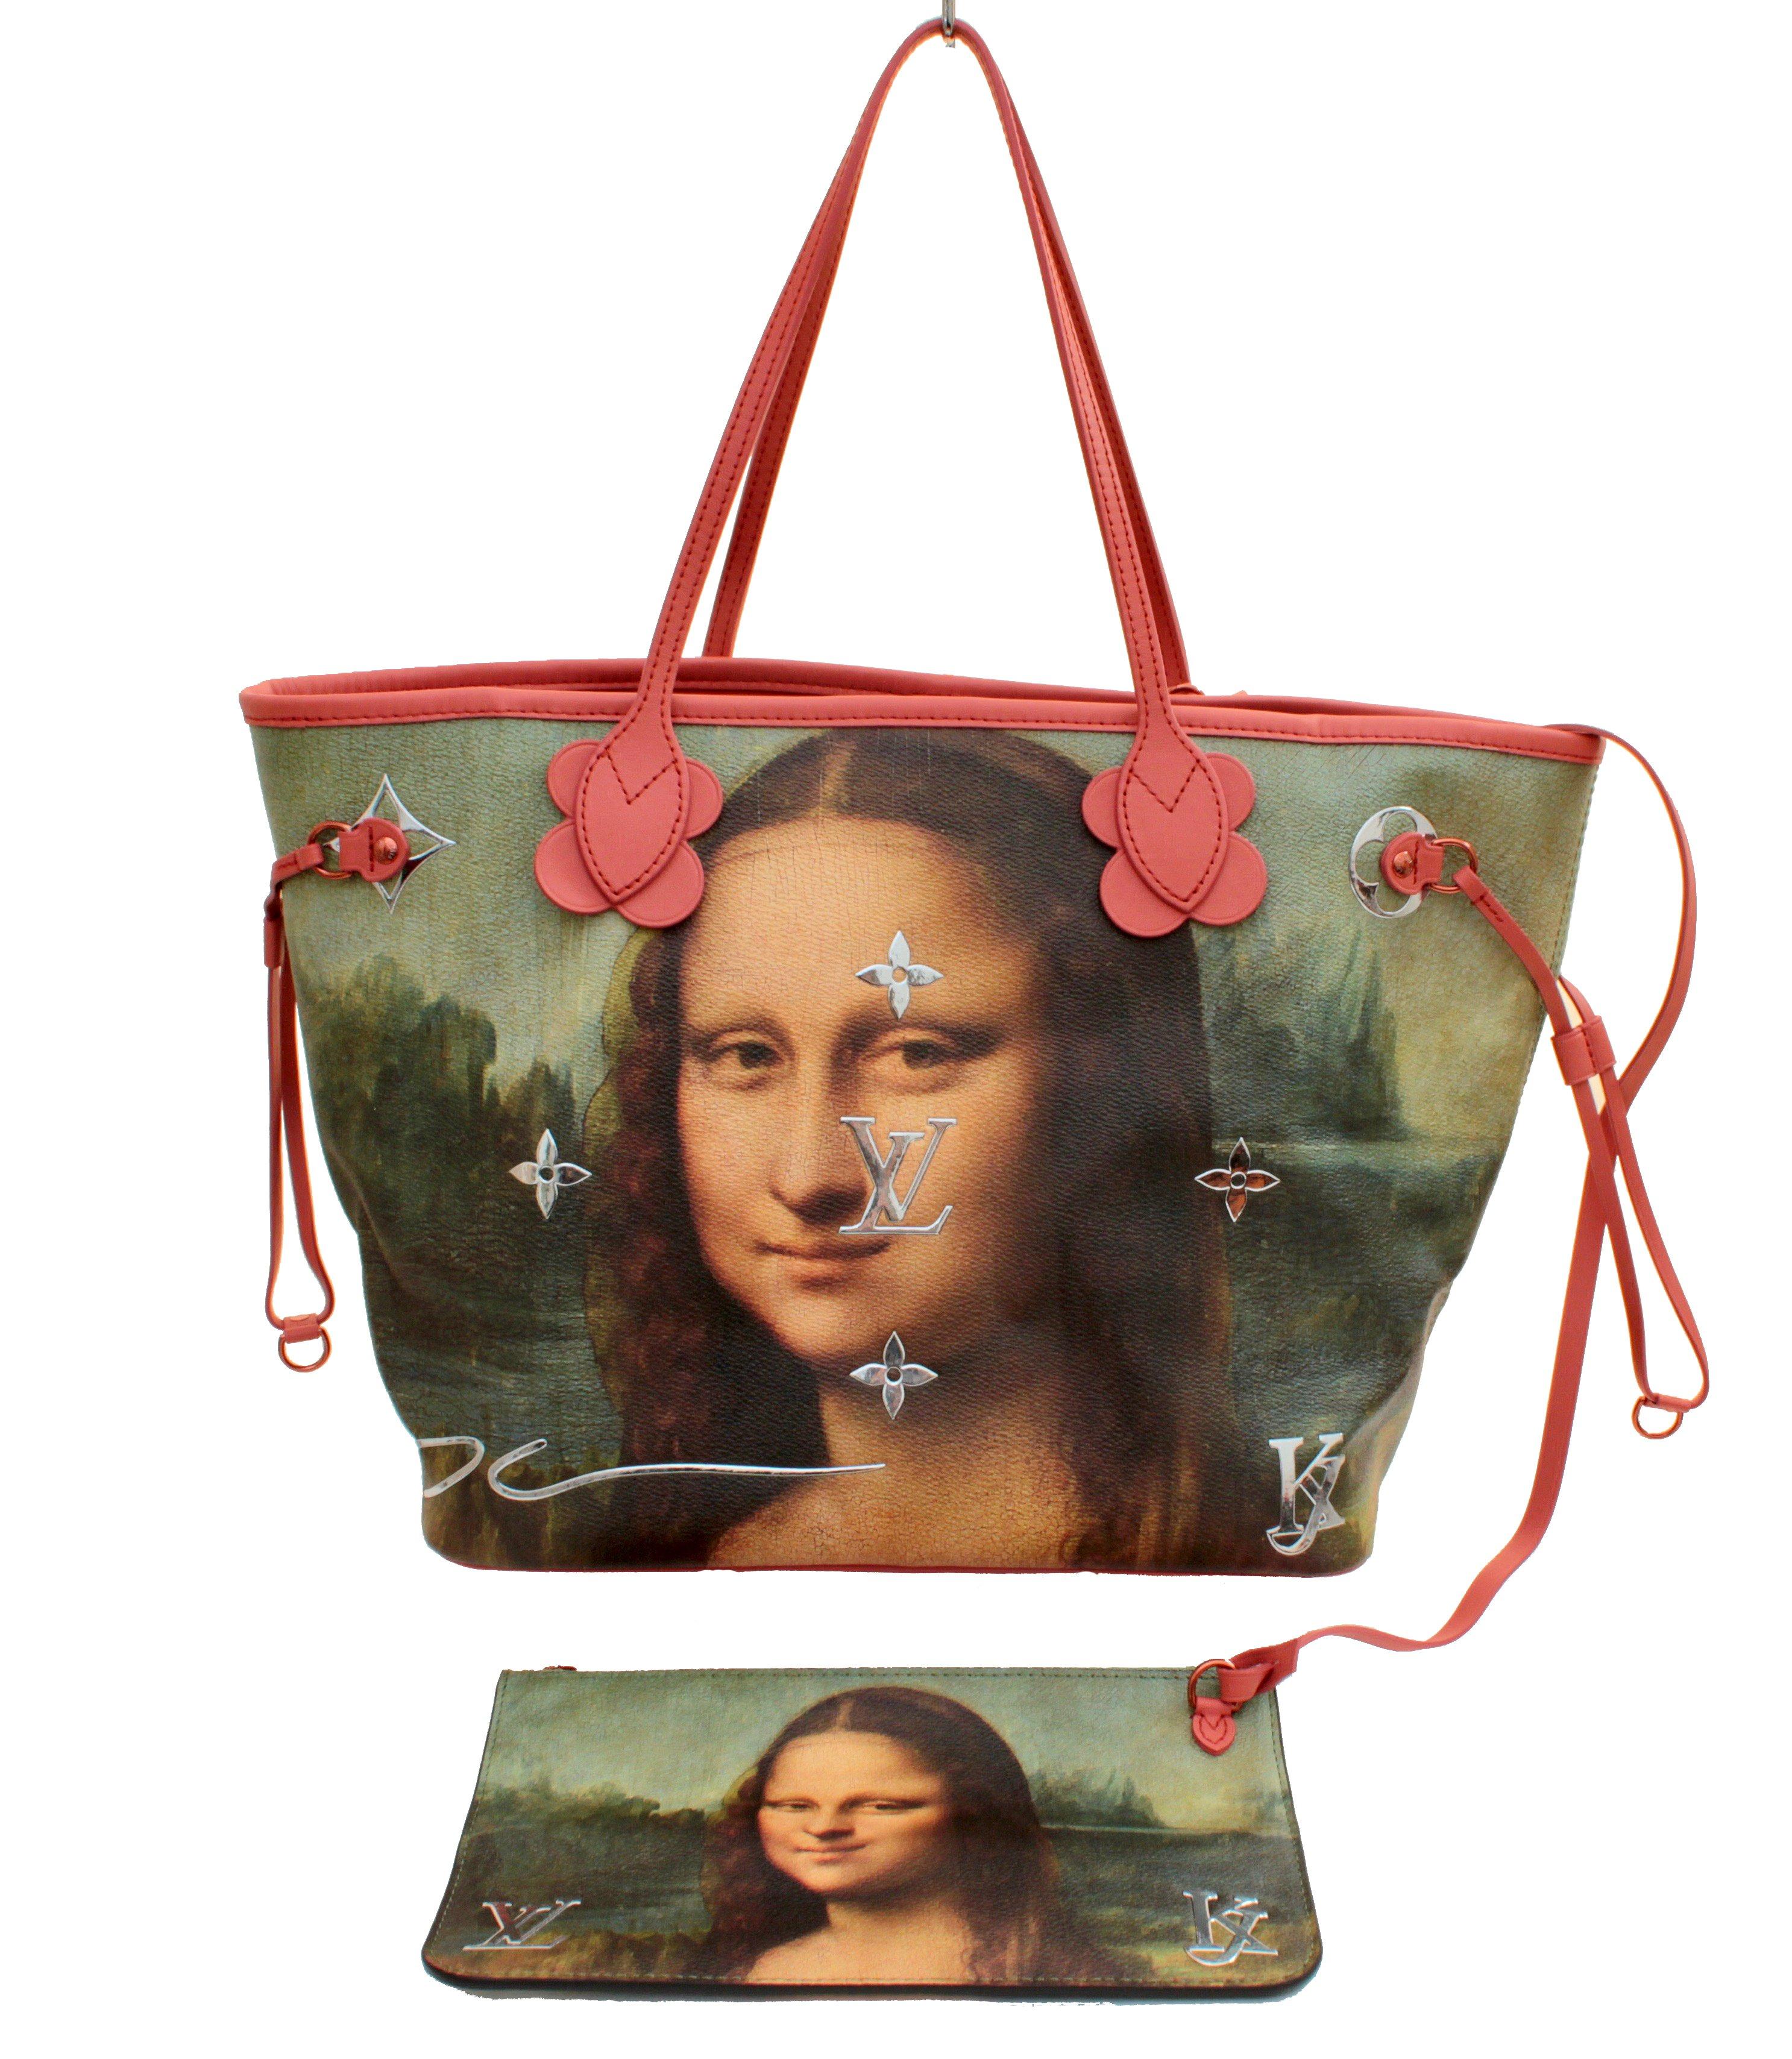 From the Louis Vuitton x Jeff Koons Limited Edition Masters Collection, here is the da Vinci Monalisa Neverfull MM tote bag in Poppy. Sold out at the boutiques and perfect for the Louis Vuitton collector! Comes with a removable clutch that can be